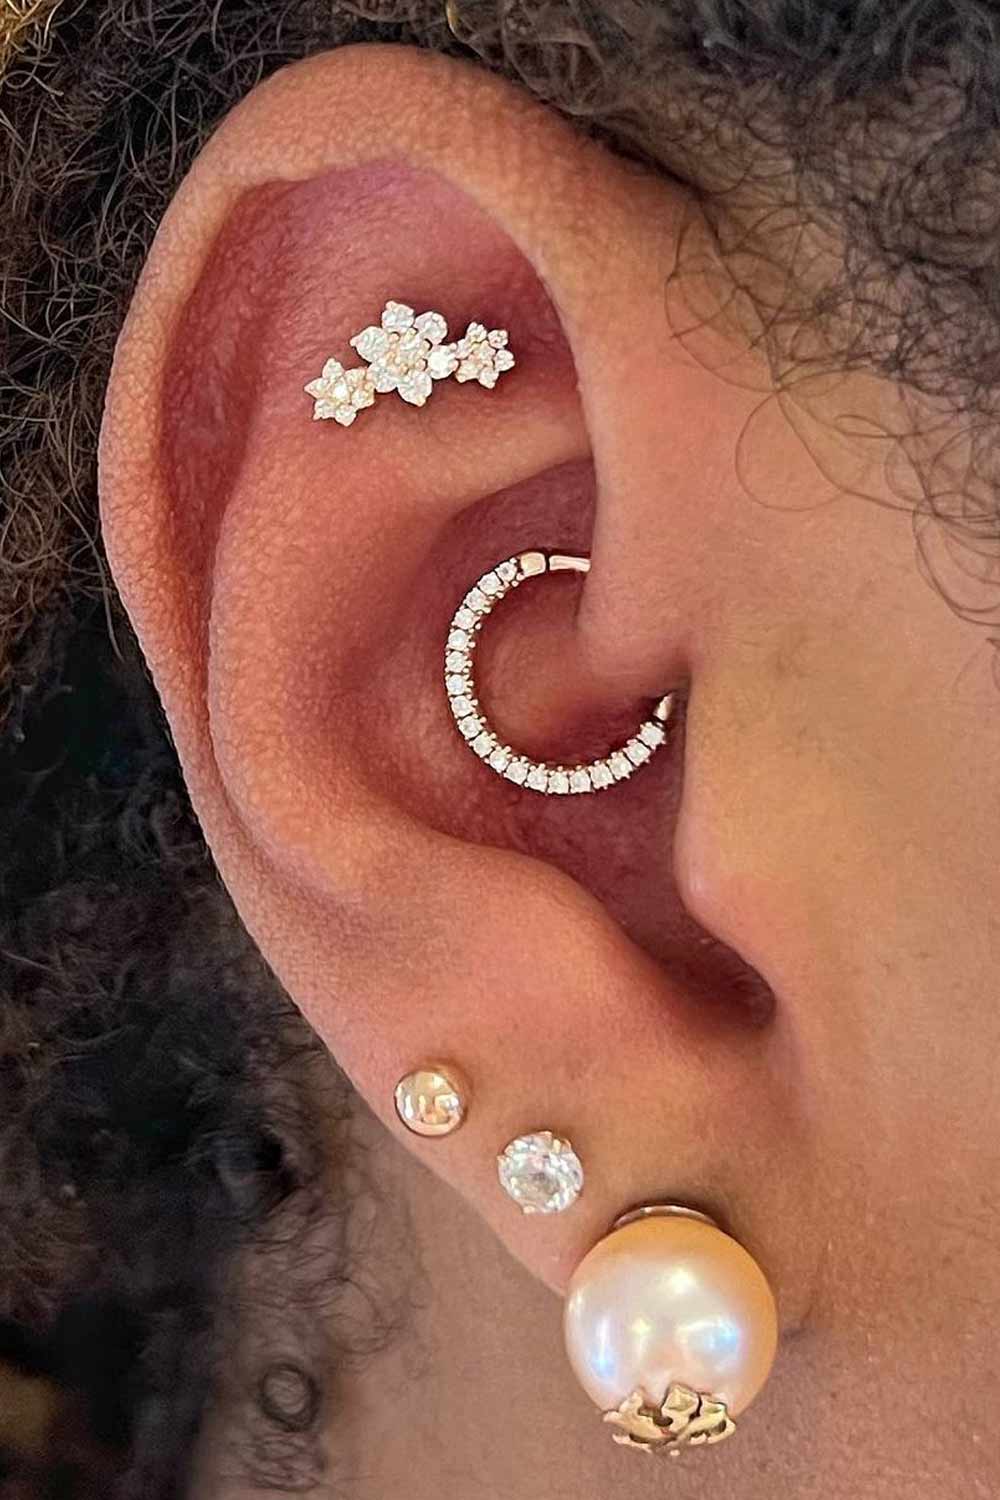 The History and Meaning of Ear Piercings